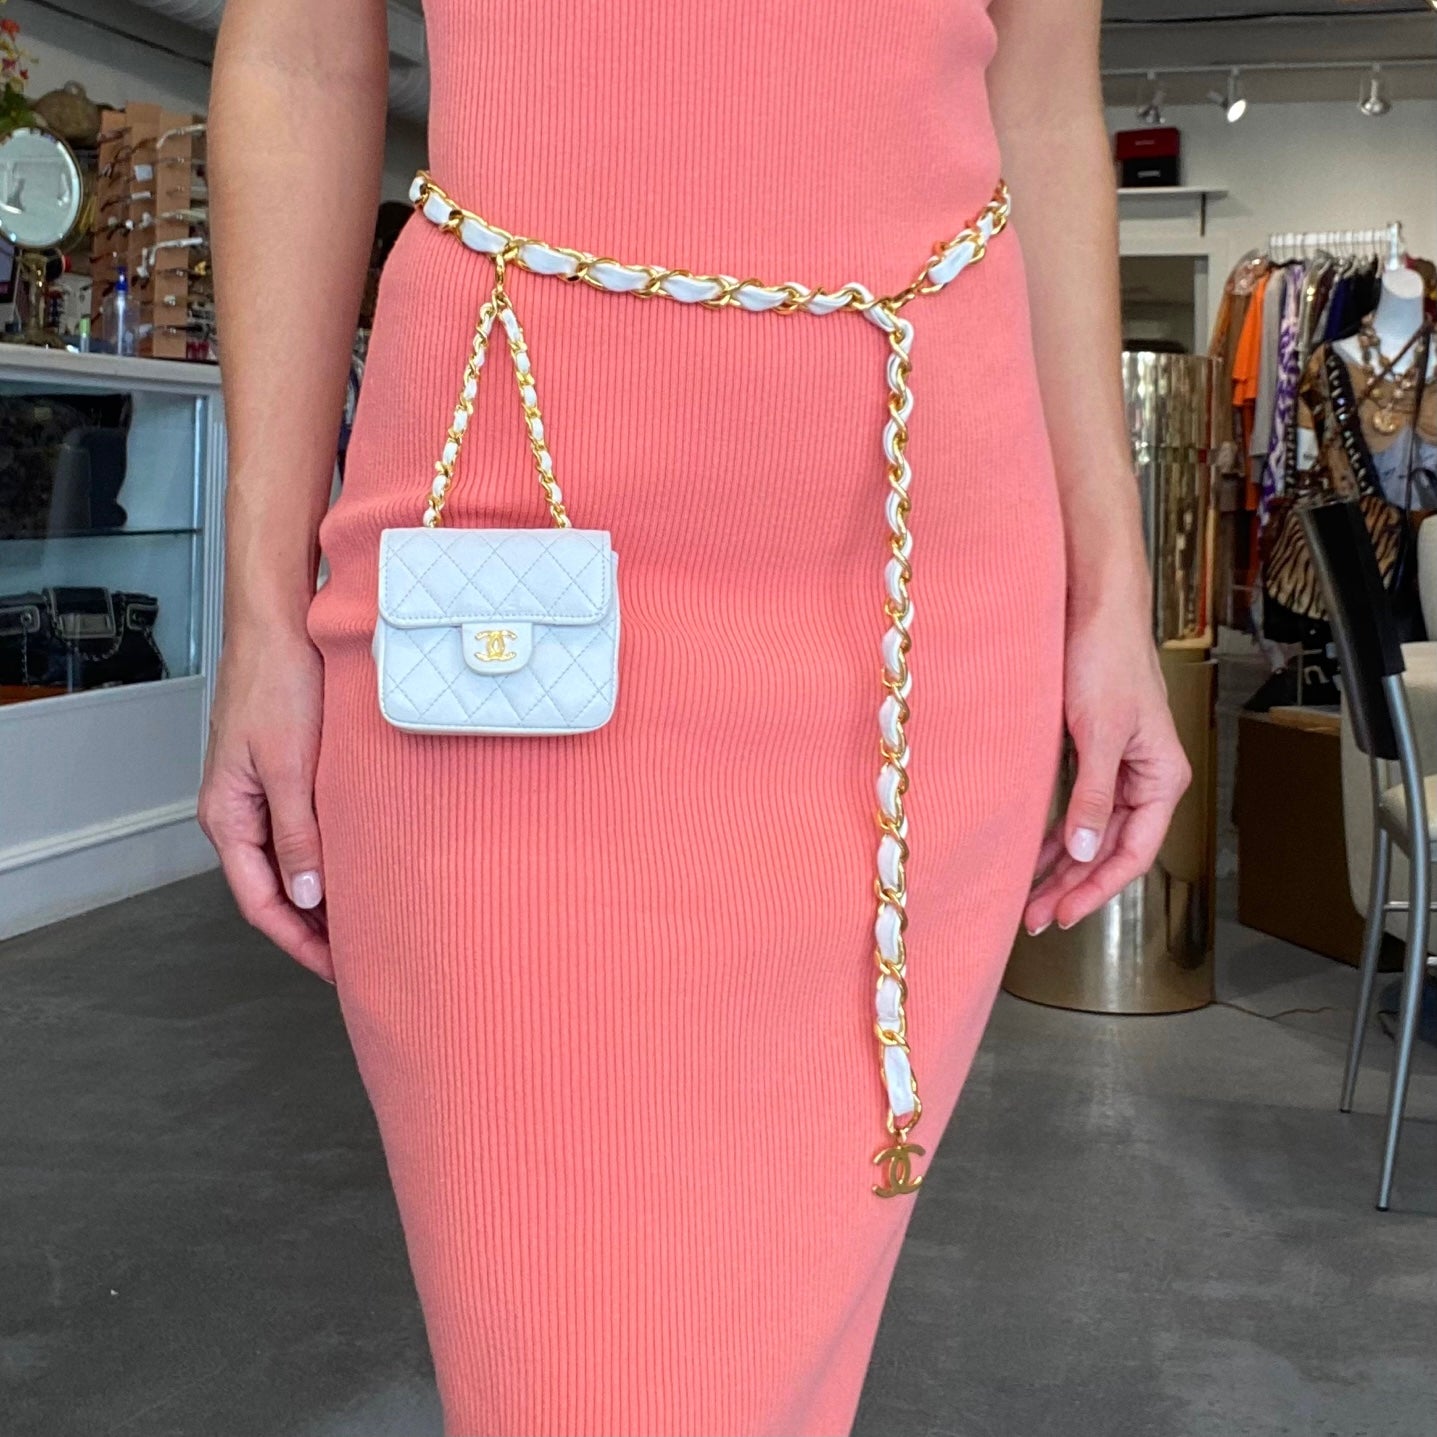 Chanel White Micro Belt Bag – Dina C's Fab and Funky Consignment